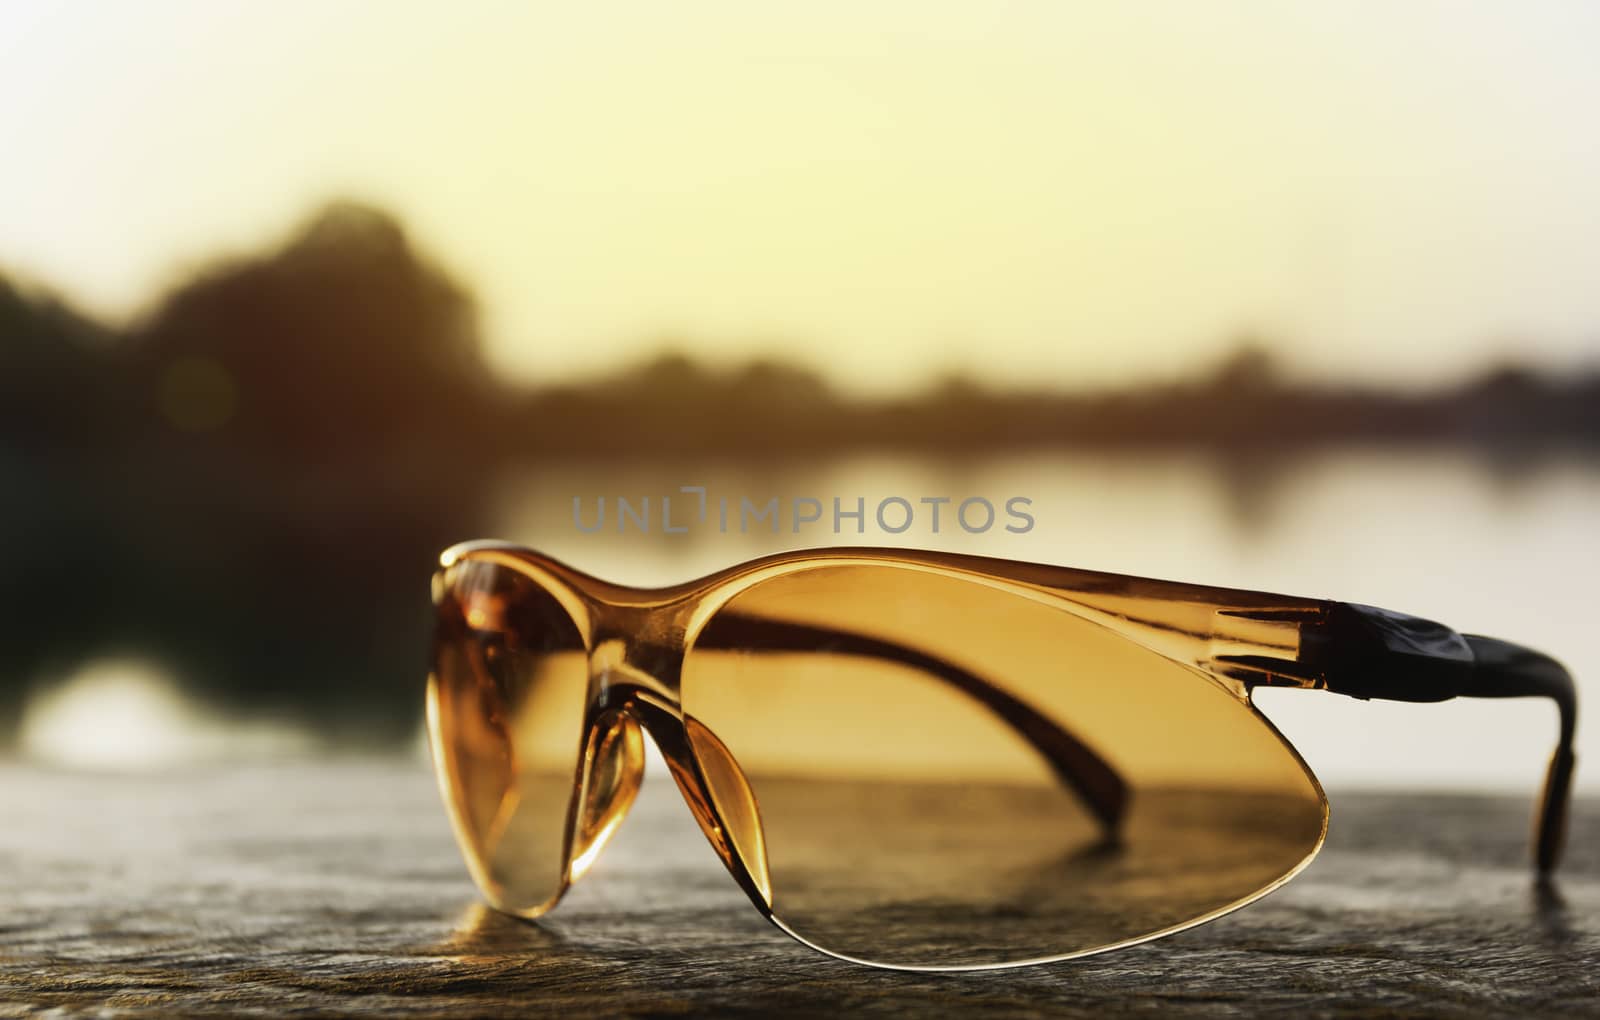 Sunglasses for sports on sunset background. Sport accessory and fashion concept.